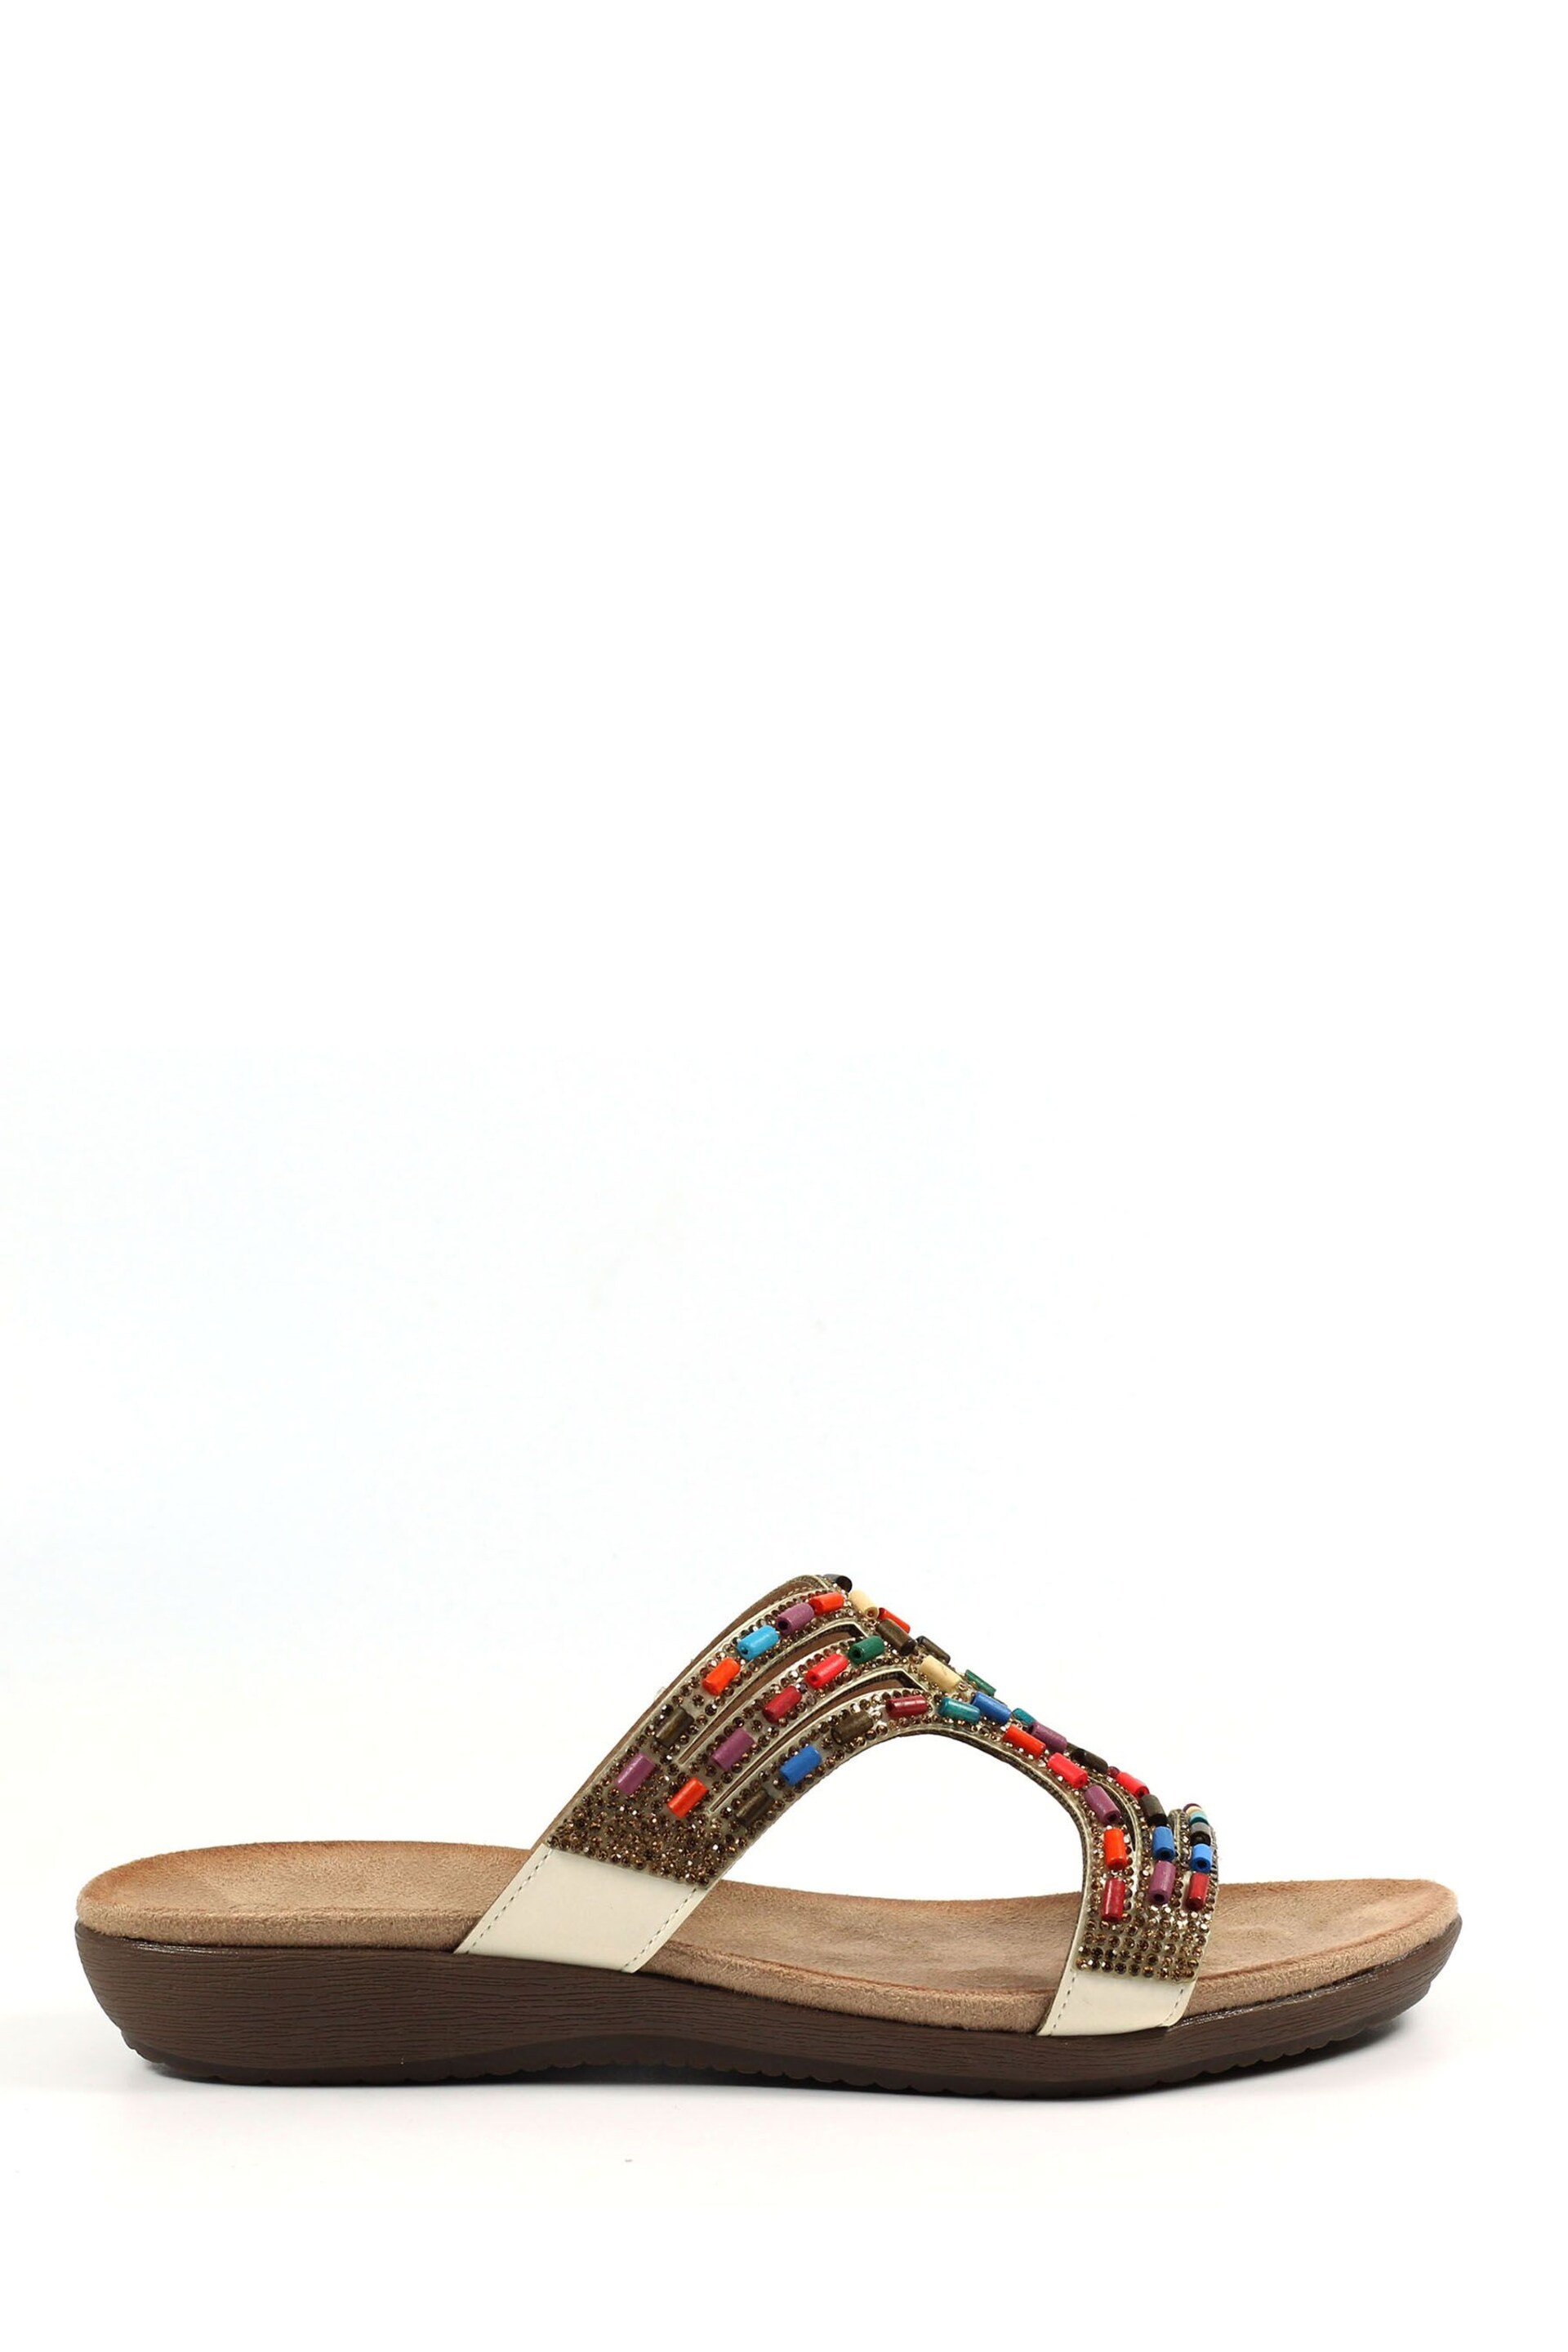 Lunar Chill II Sandals - Image 4 of 7